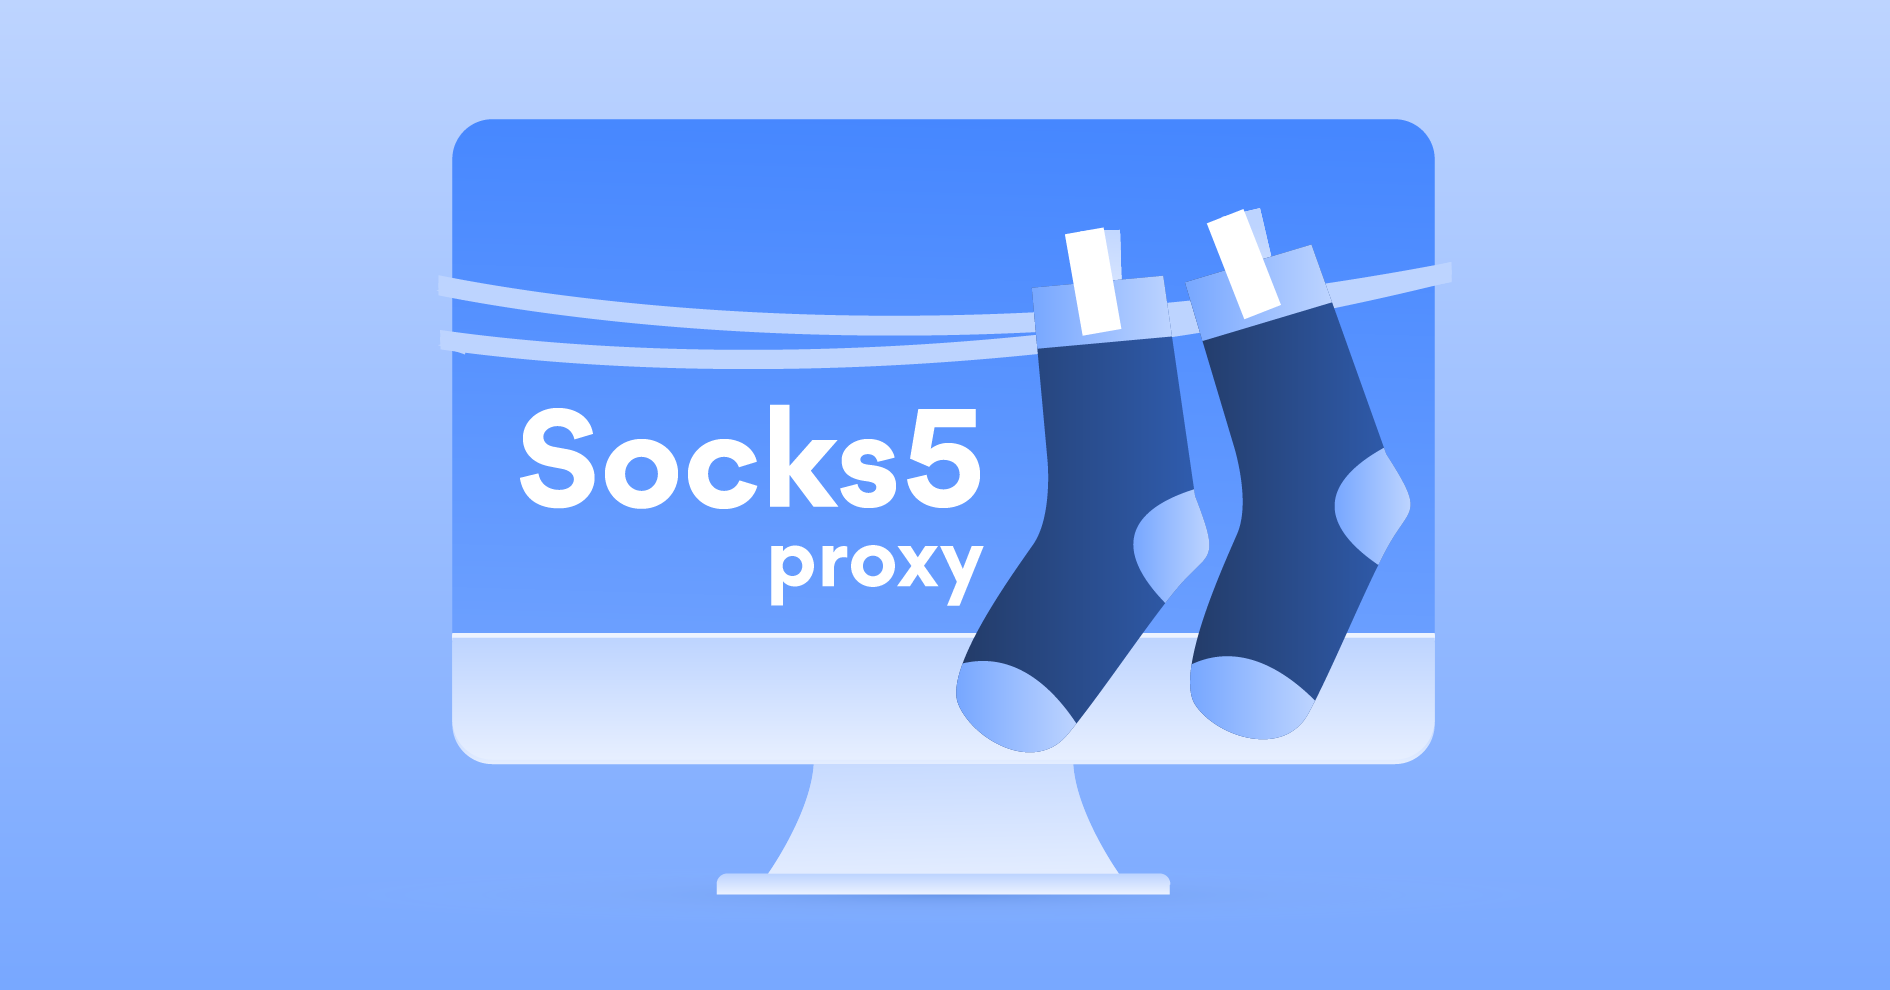 What are the benefits of a SOCKS5 proxy?